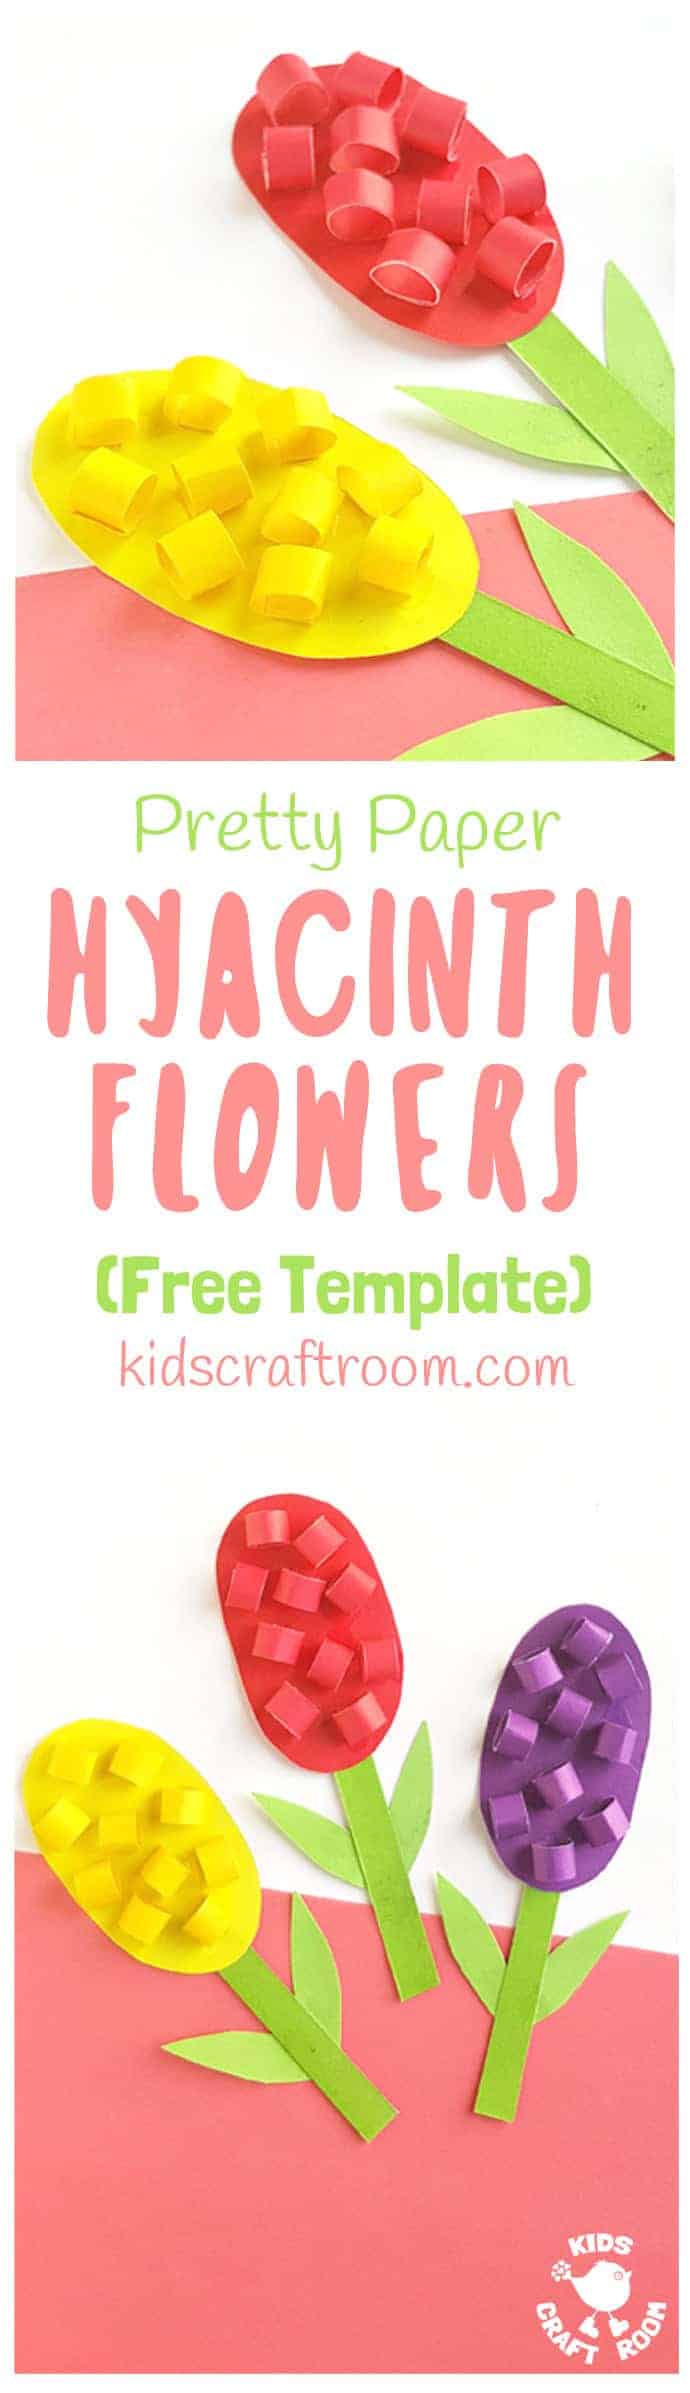 HYACINTH CRAFT - Celebrate Spring with this Pretty Paper Hyacinth Flower Craft. You can make them in all sorts of bright and cheerful colours everyone will love. Their gorgeous spikes of colour are always such a welcome sight after a long Winter. (Free printable template.) #papercrafts #flowercrafts #hyacinths #hyacinthcrafts #mothersdaycrafts #springcrafts #kidscrafts #kidsactivities #craftsforkids #kidscraftroom #flowers #mothersday 